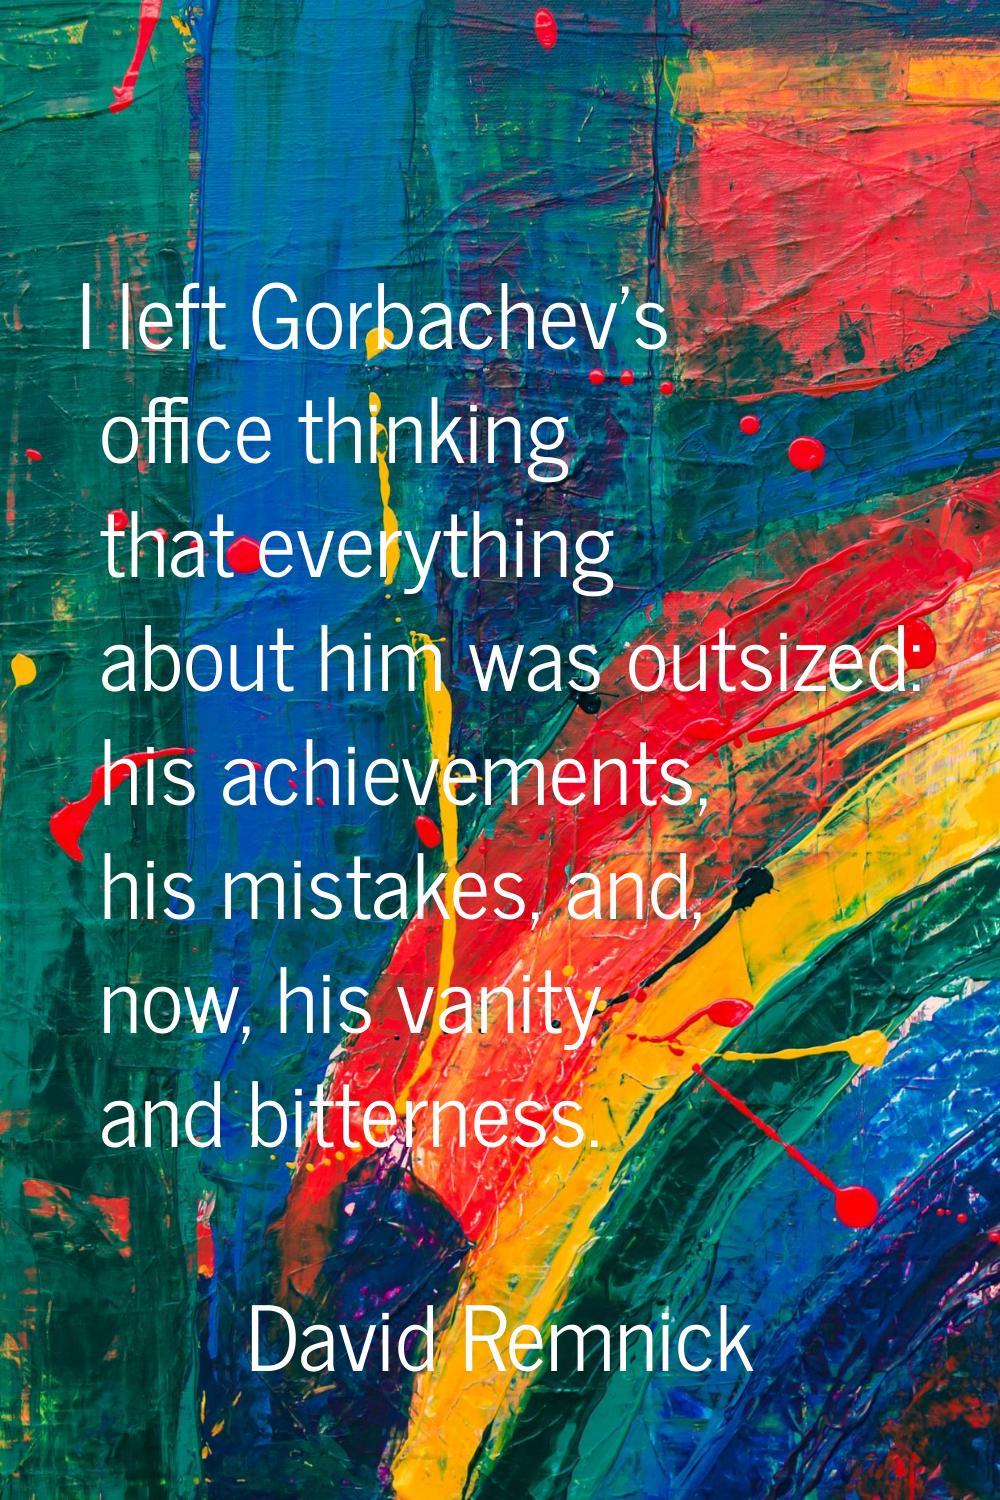 I left Gorbachev's office thinking that everything about him was outsized: his achievements, his mi